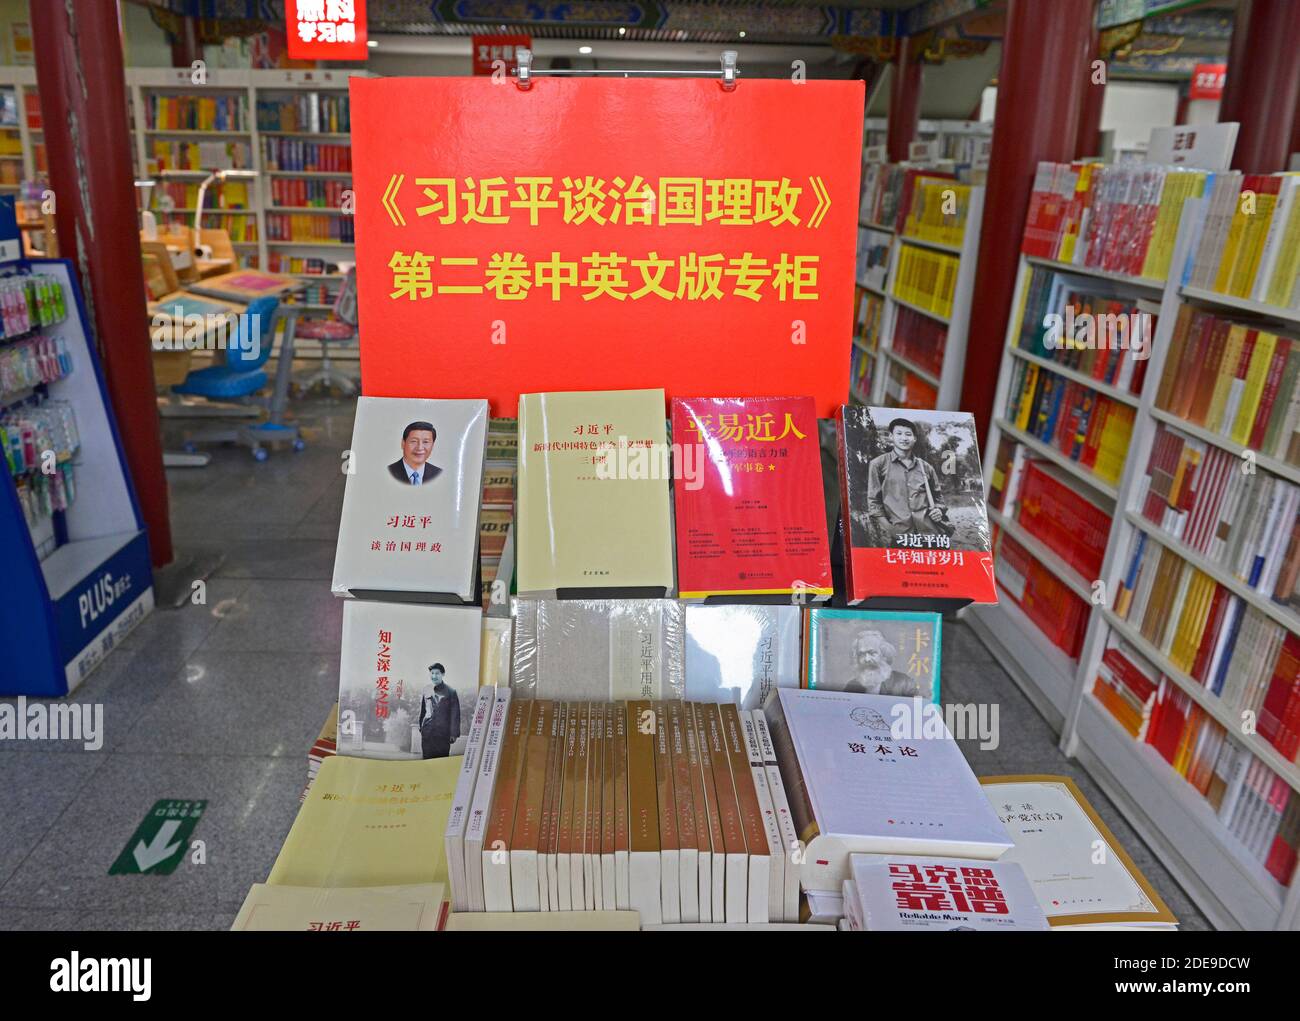 Books about Xi Jinping take pride of place at the end of an aisle in a Xinhua bookshop in Xicheng district, Beijing, China Stock Photo